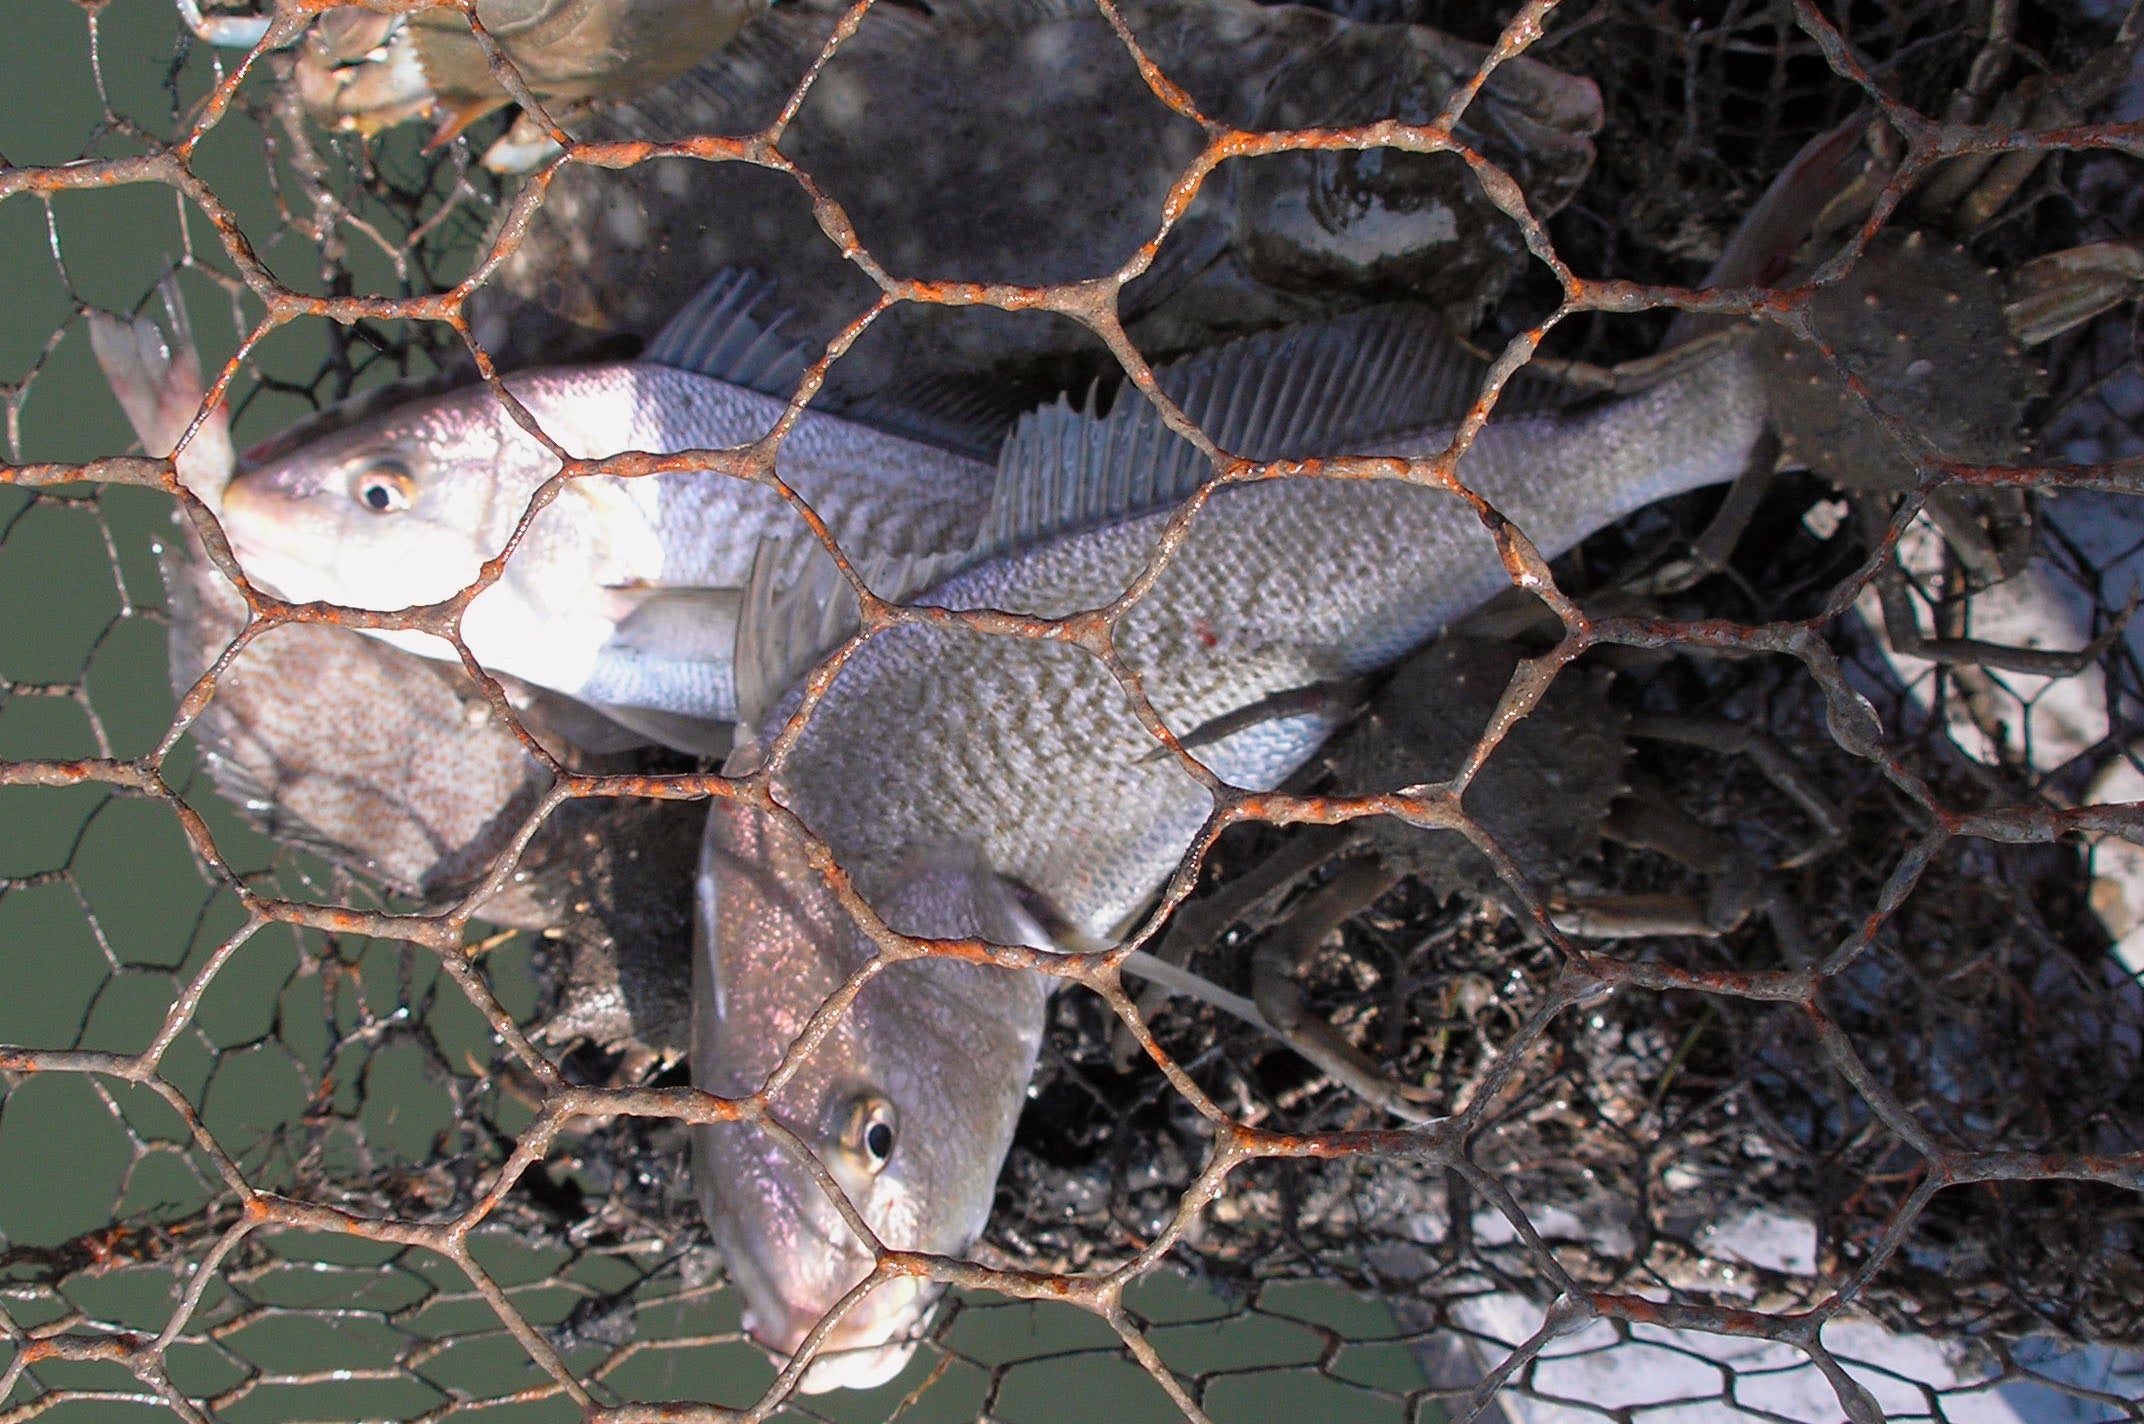  Abandoned crab pots unnecessarily trap fish and harm the marine ecosystem, according to the Conserve Wildlife Foundation of NJ. (Image: NOAA) 